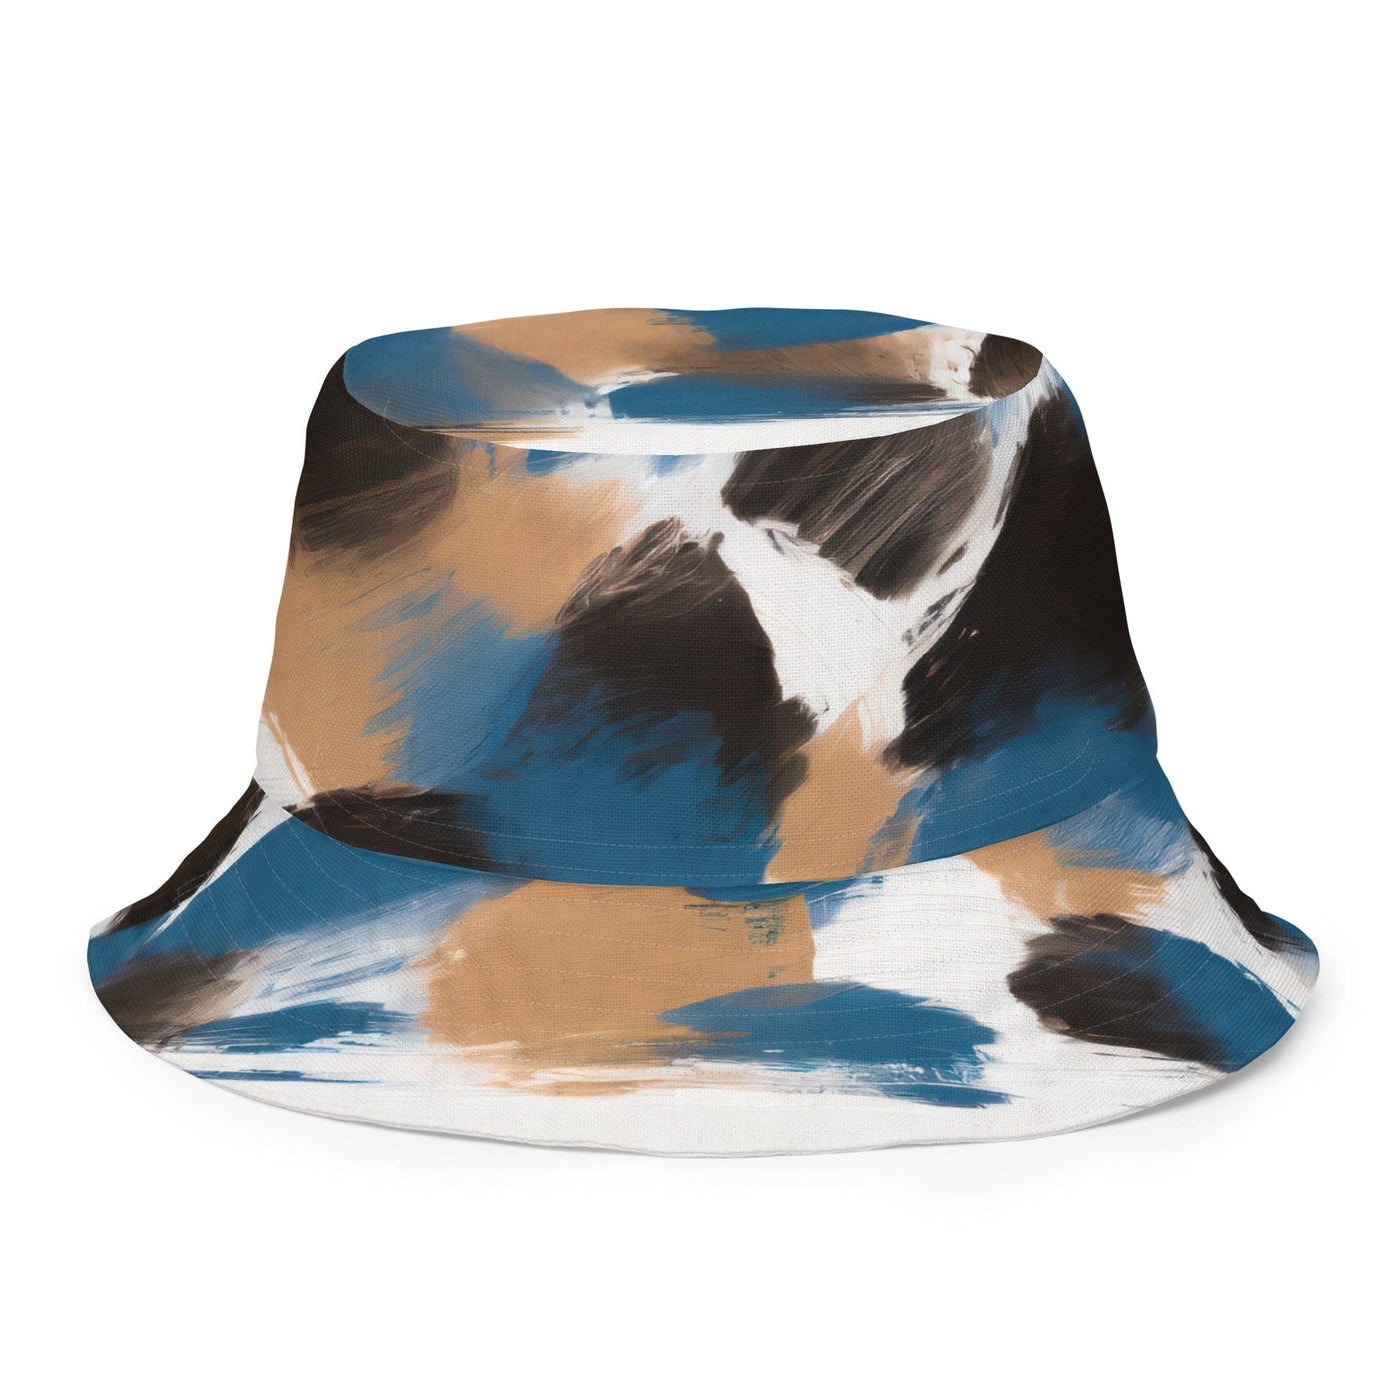 Reversible Bucket Hat Spotted Rustic Blue And Brown